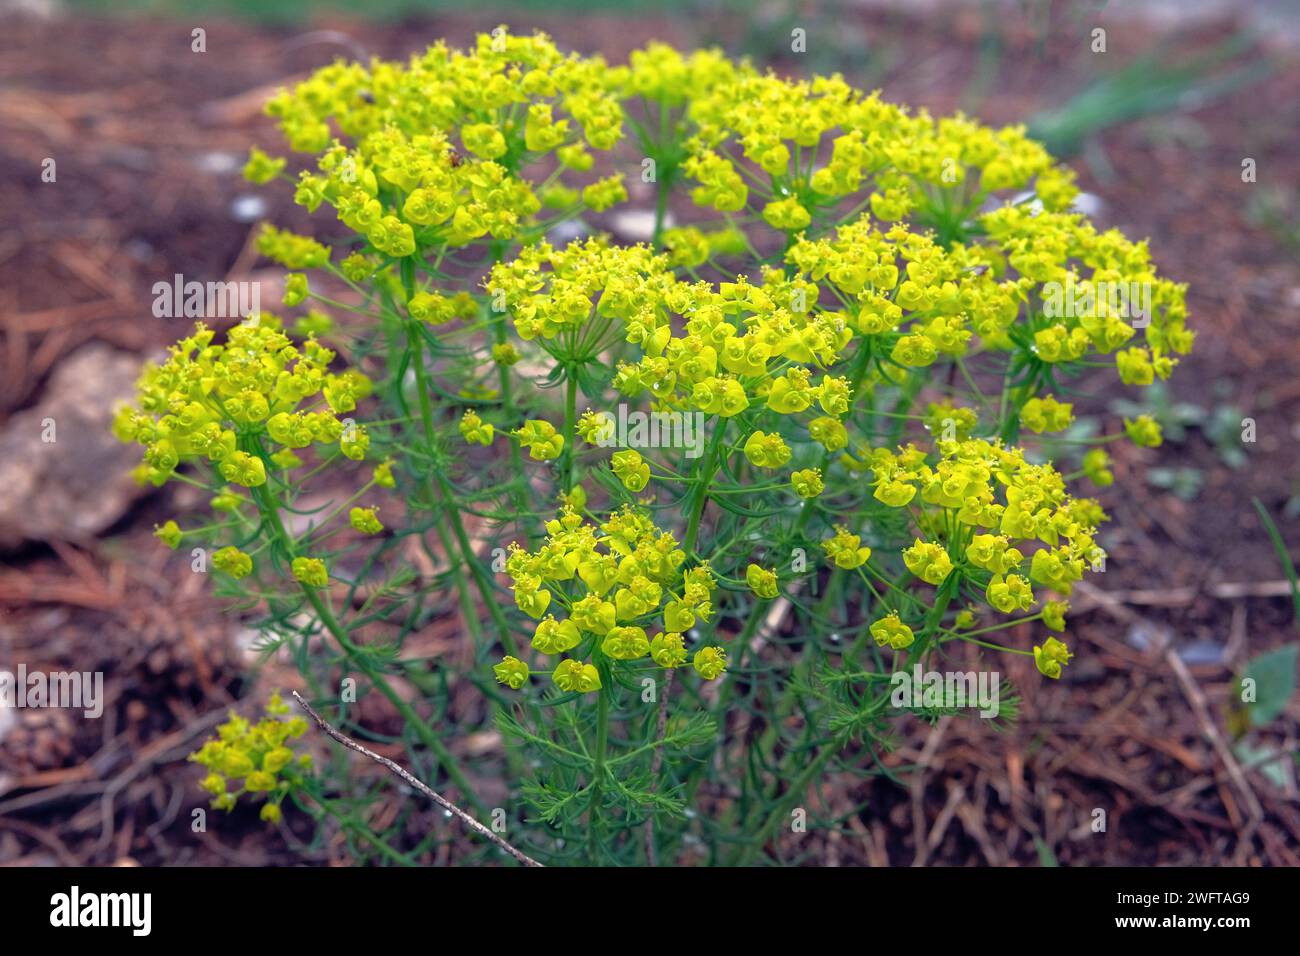 Euphorbia cyparissias. Poisonous perennial plant of the milkweed family. Occasionally used as a medicinal plant. Fragrant flowers, petals are yellowis Stock Photo